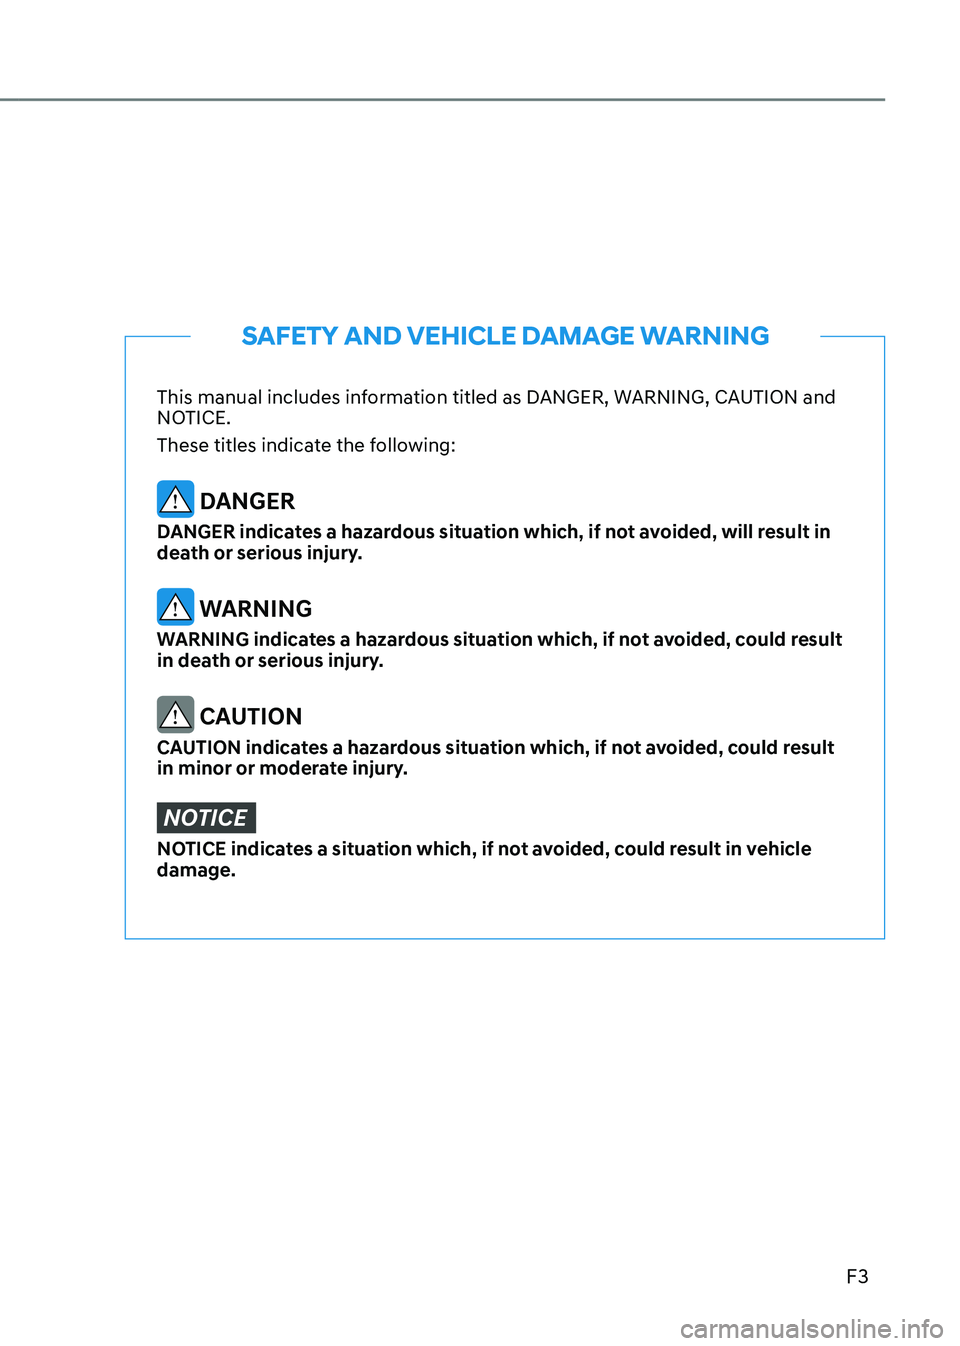 HYUNDAI KONA EV 2023  Owners Manual F3
This manual includes information titled as DANGER, WARNING, CAUTION and  
NOTICE. 
These titles indicate the following:  
 DANGER
DANGER indicates a hazardous situation which, if not avoided, will 